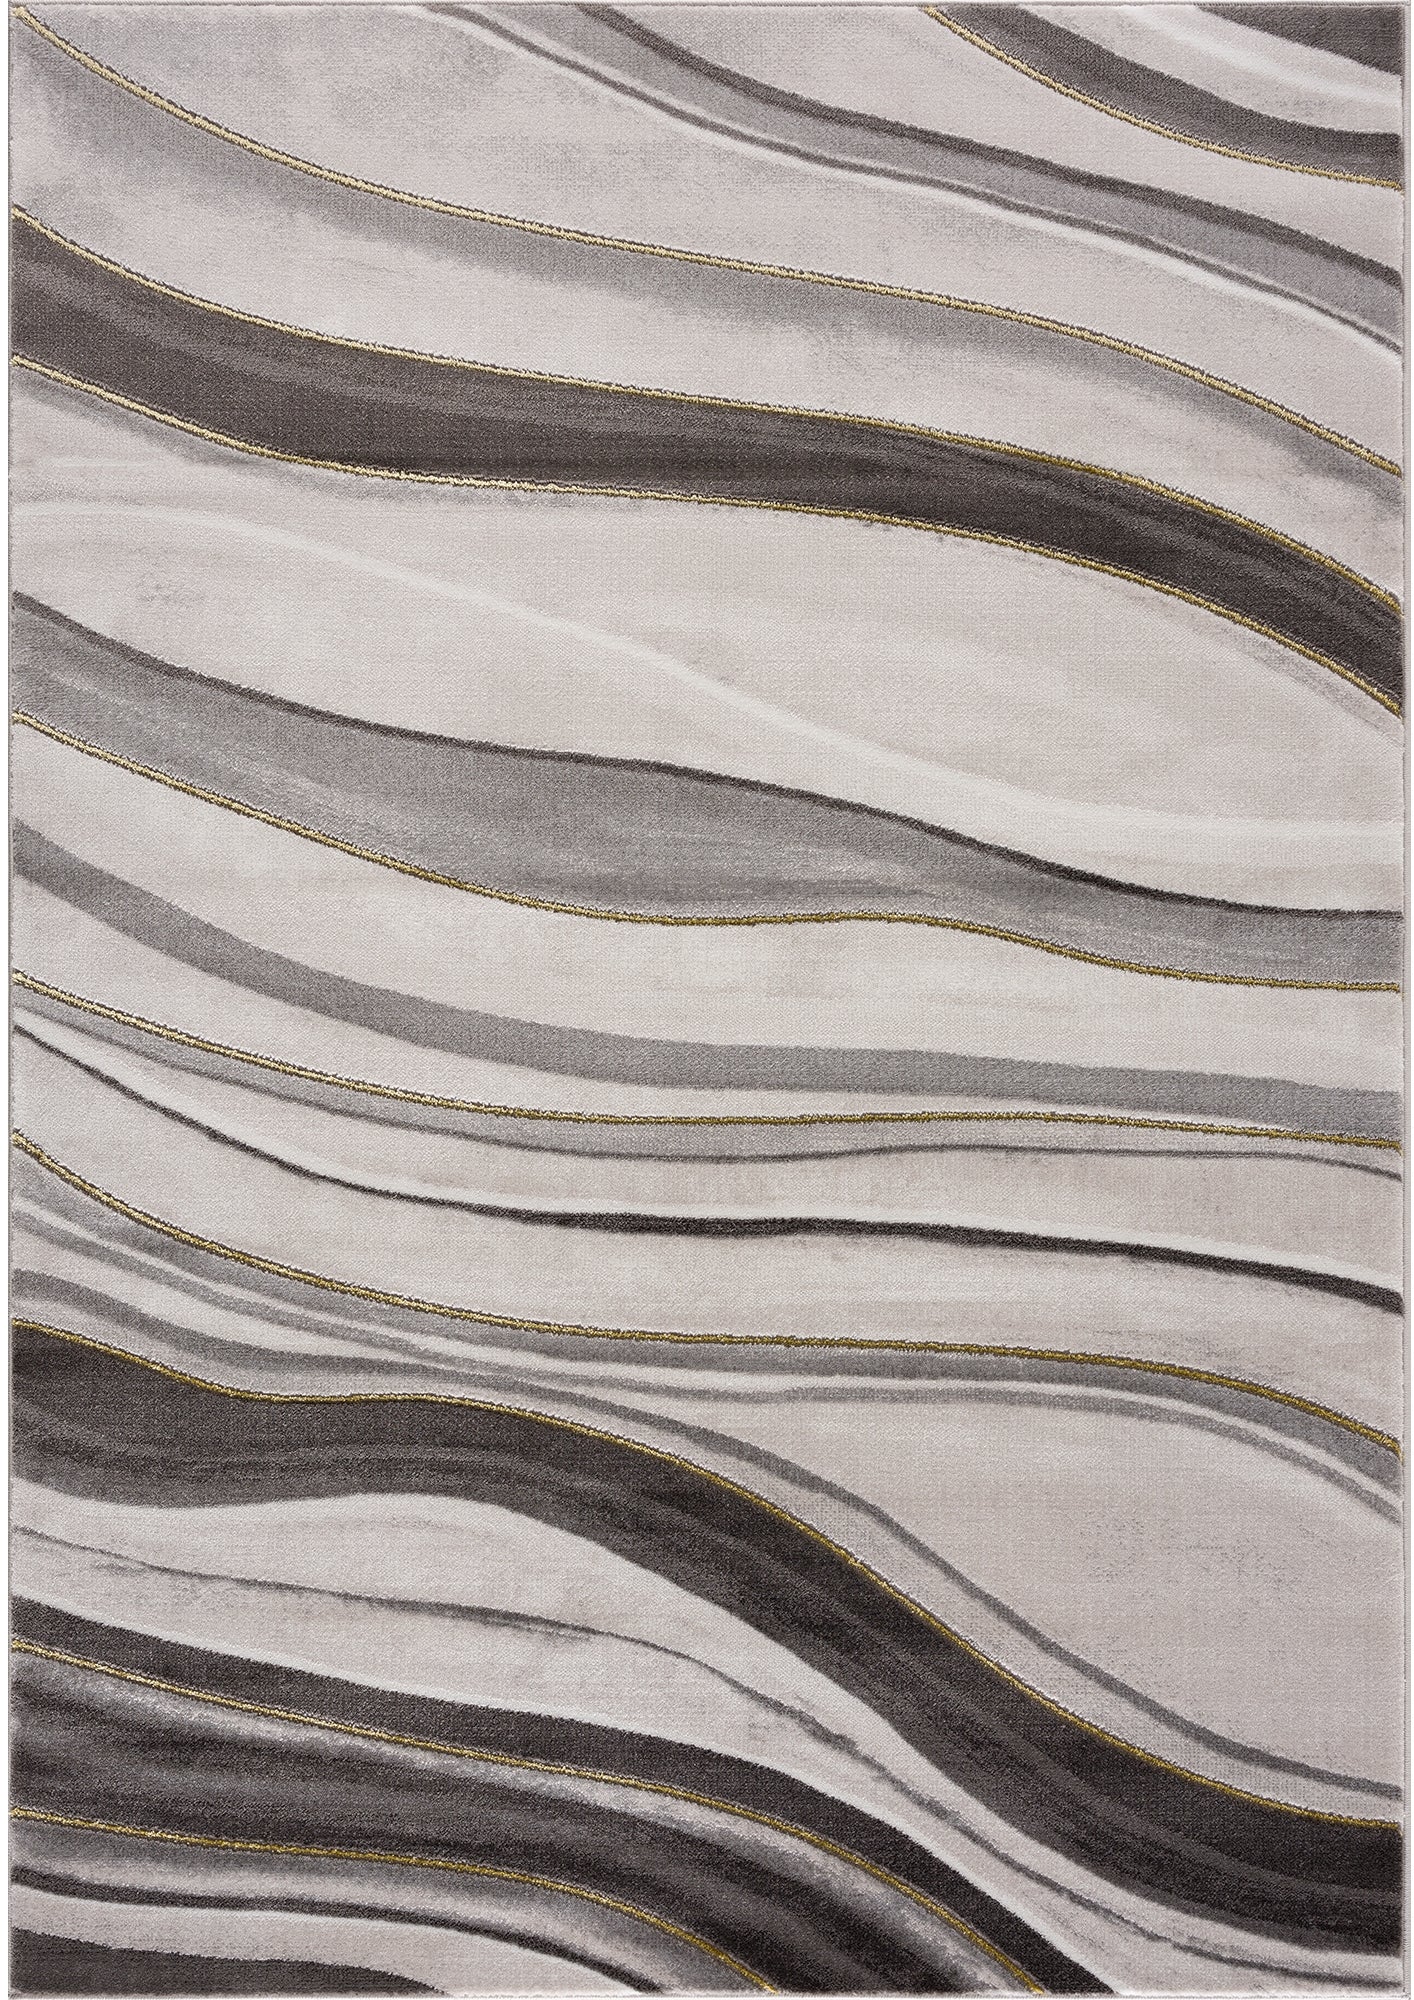 light dark grey beige gold spirals waves striped pattern abstract modern area rug 2x5, 3x5 Runner Rug, Entry Way, Entrance, Balcony, Bedside, Home Office, Table Top